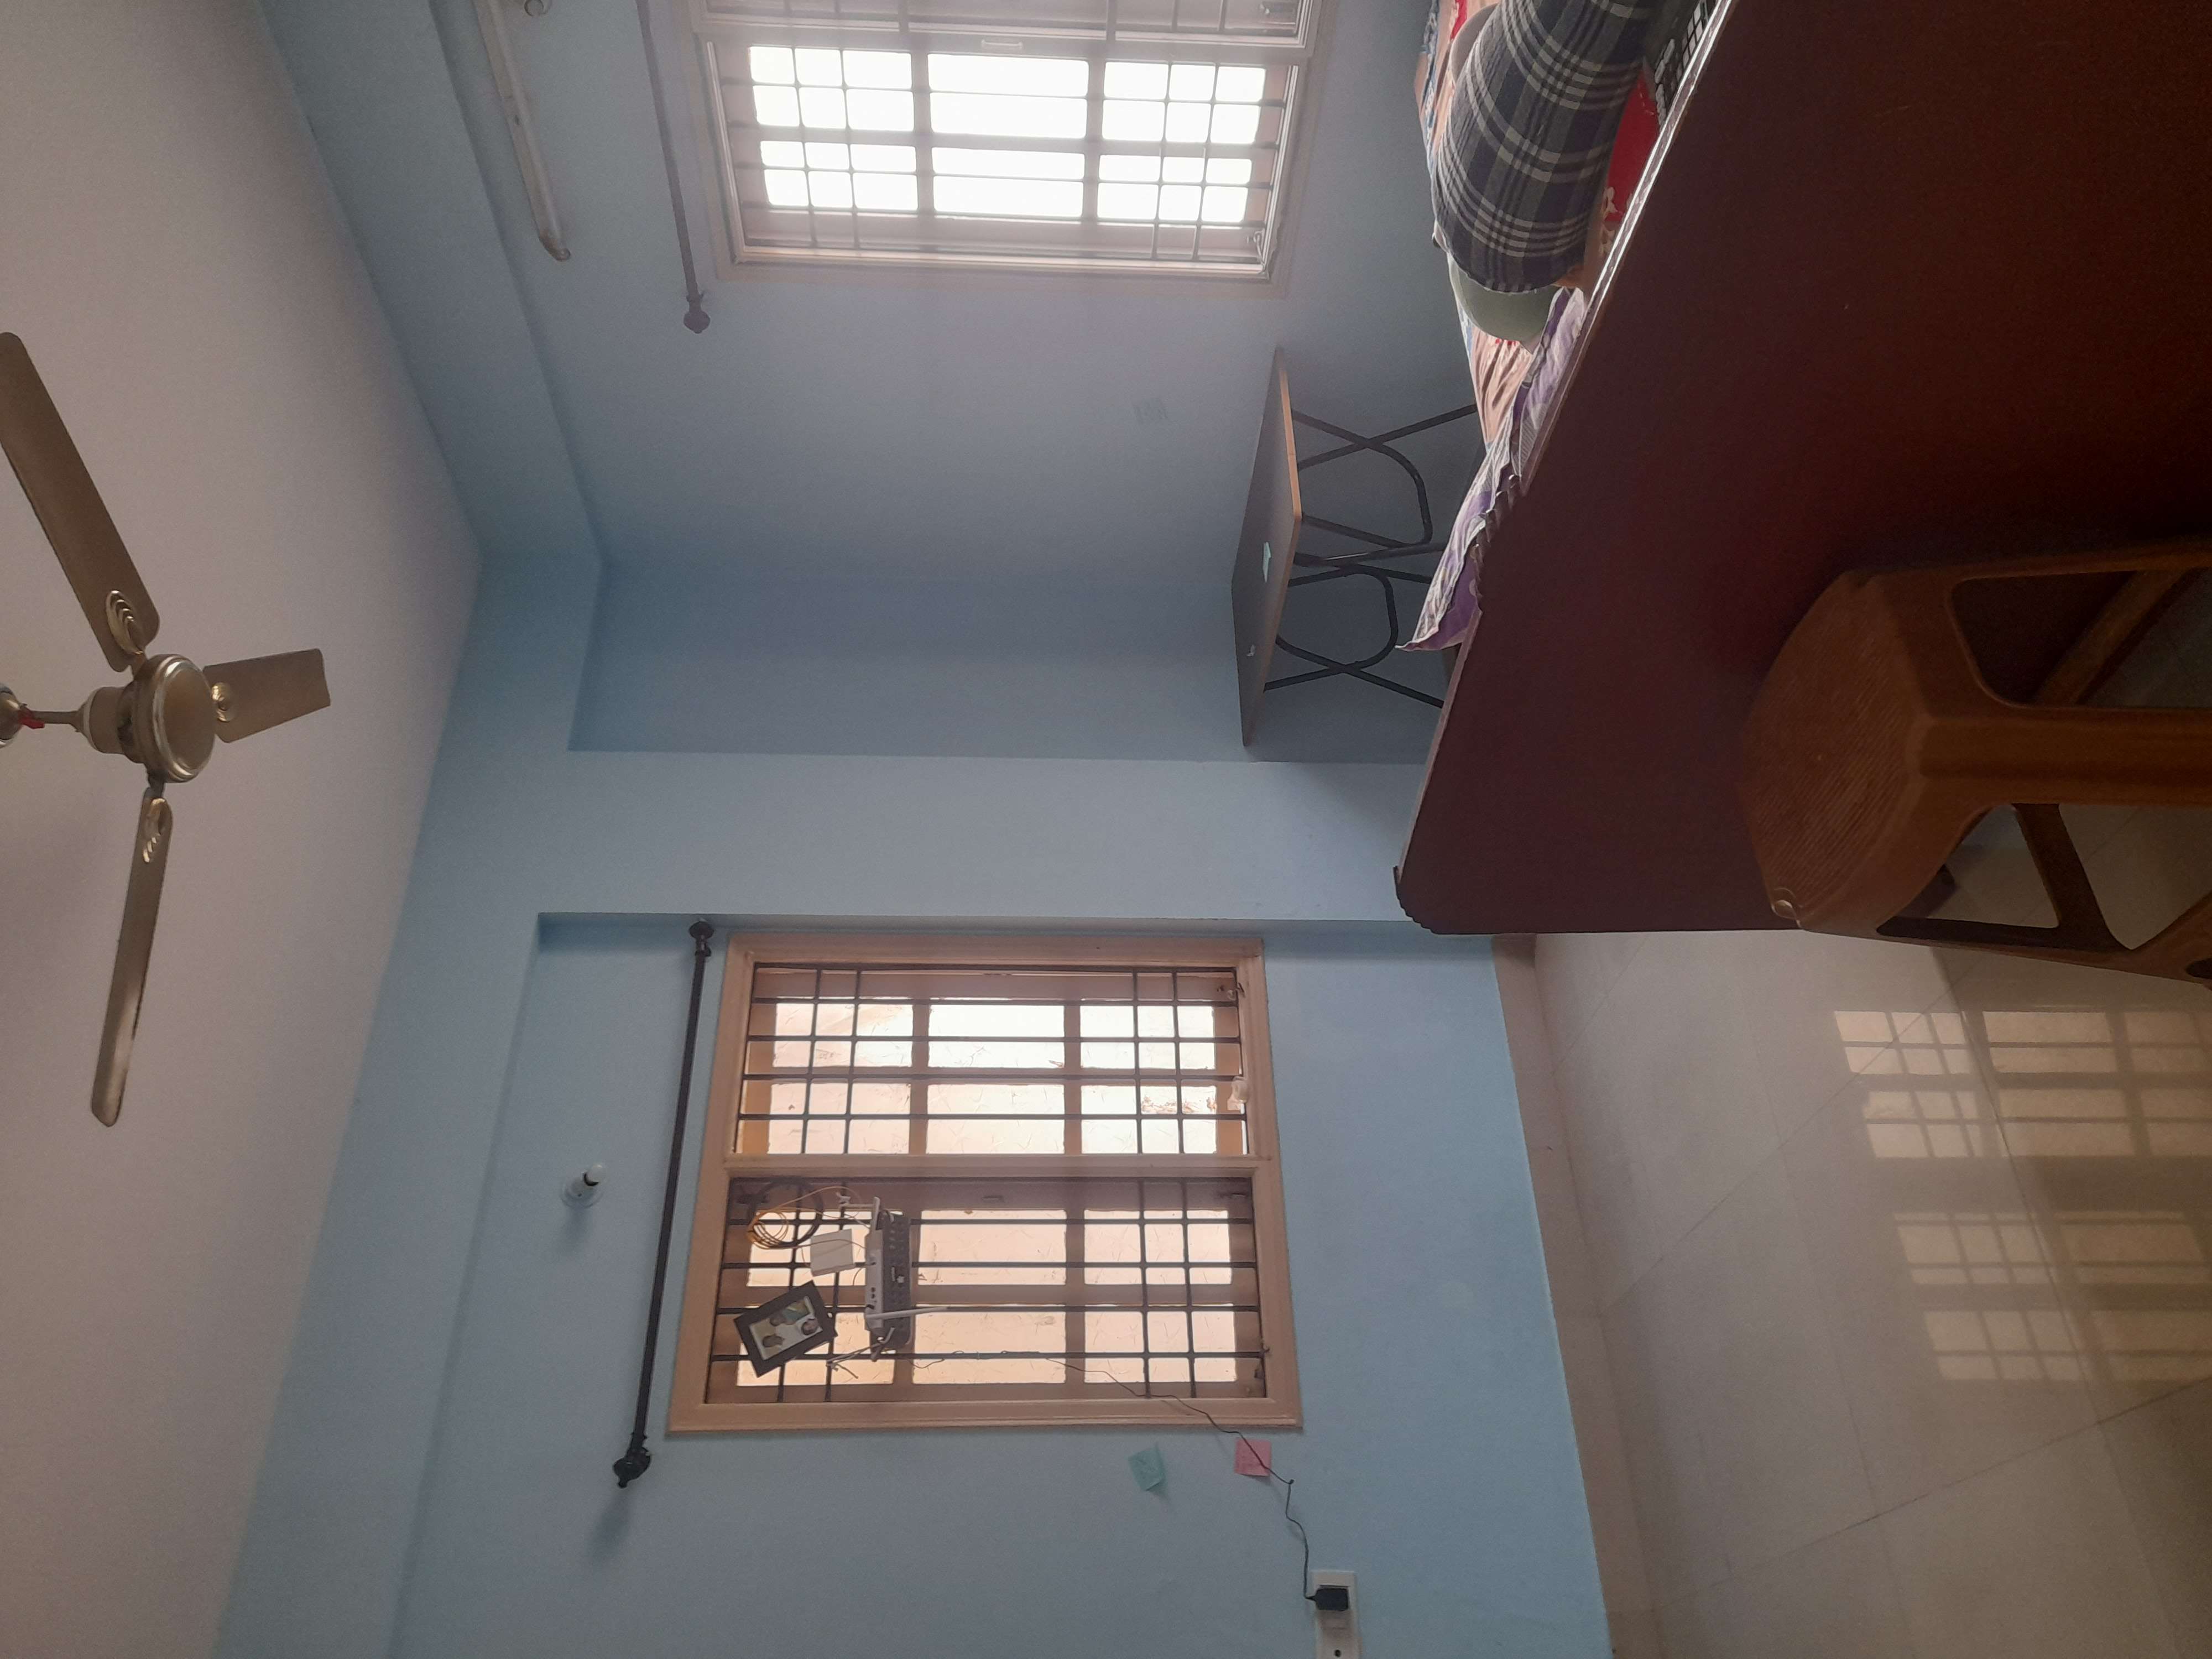 House for Rent in Jayanagar 3rd Block, Bangalore